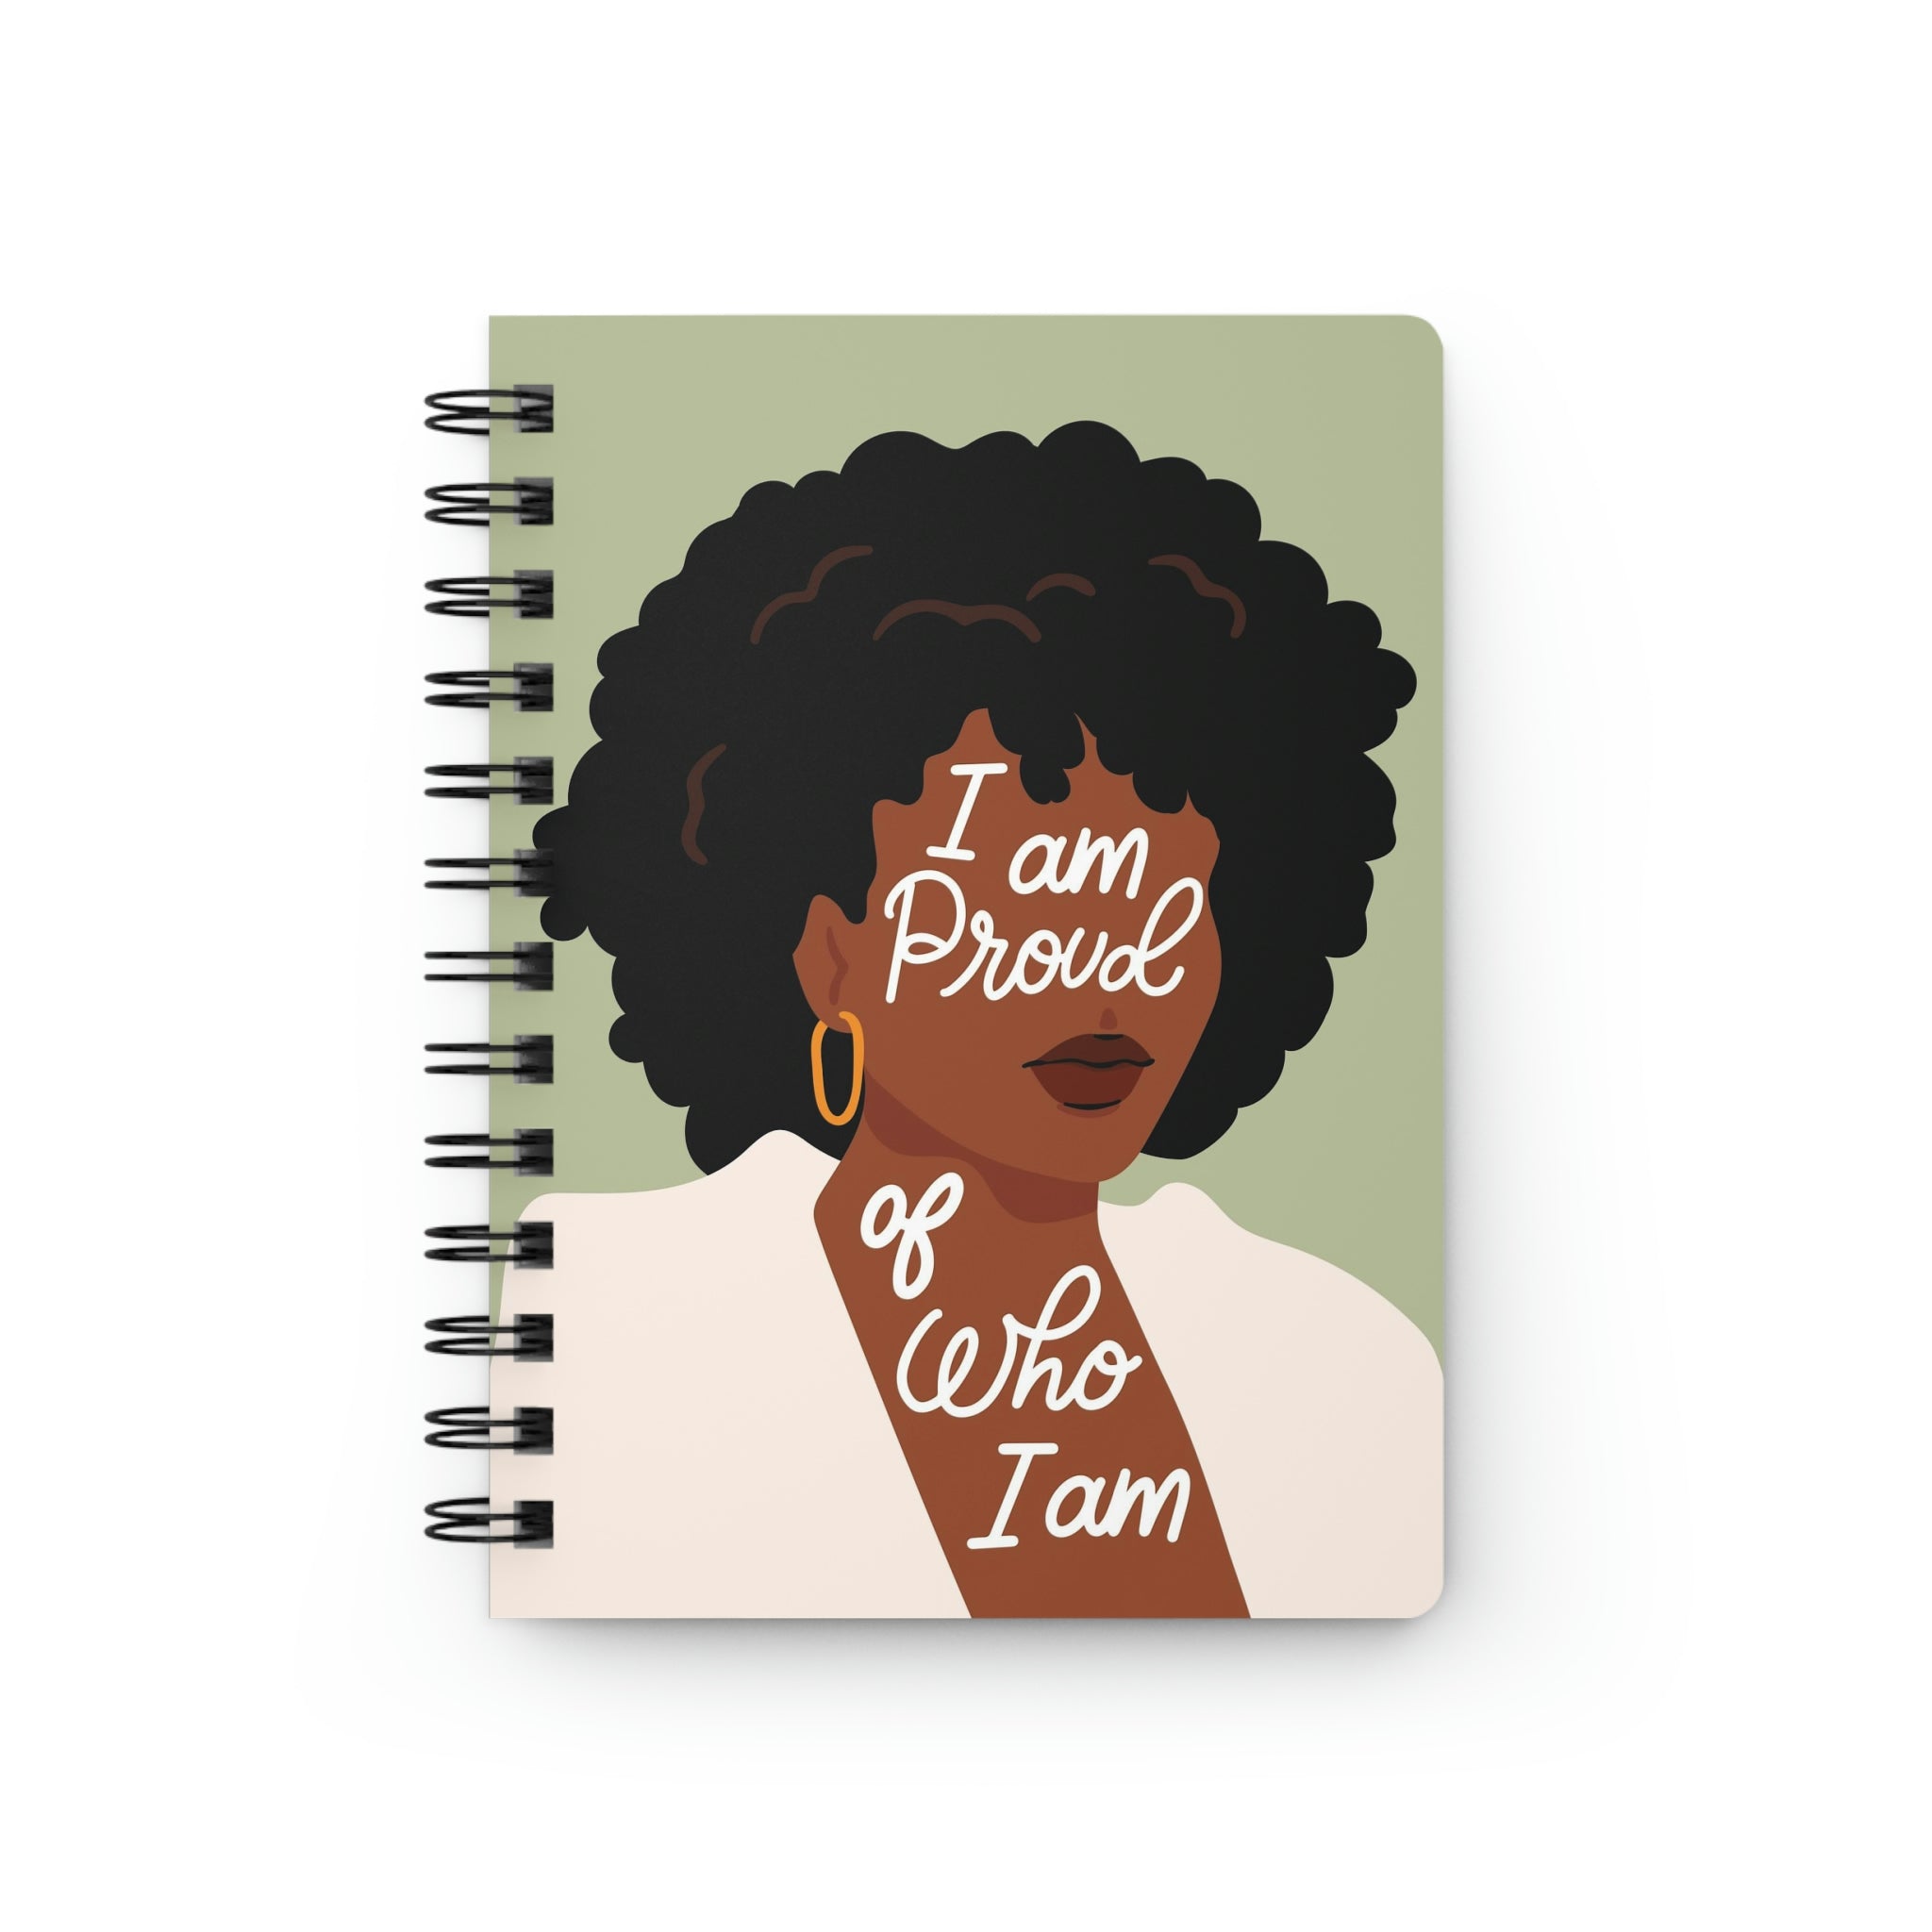 "I am Proud of Who I am" Journal